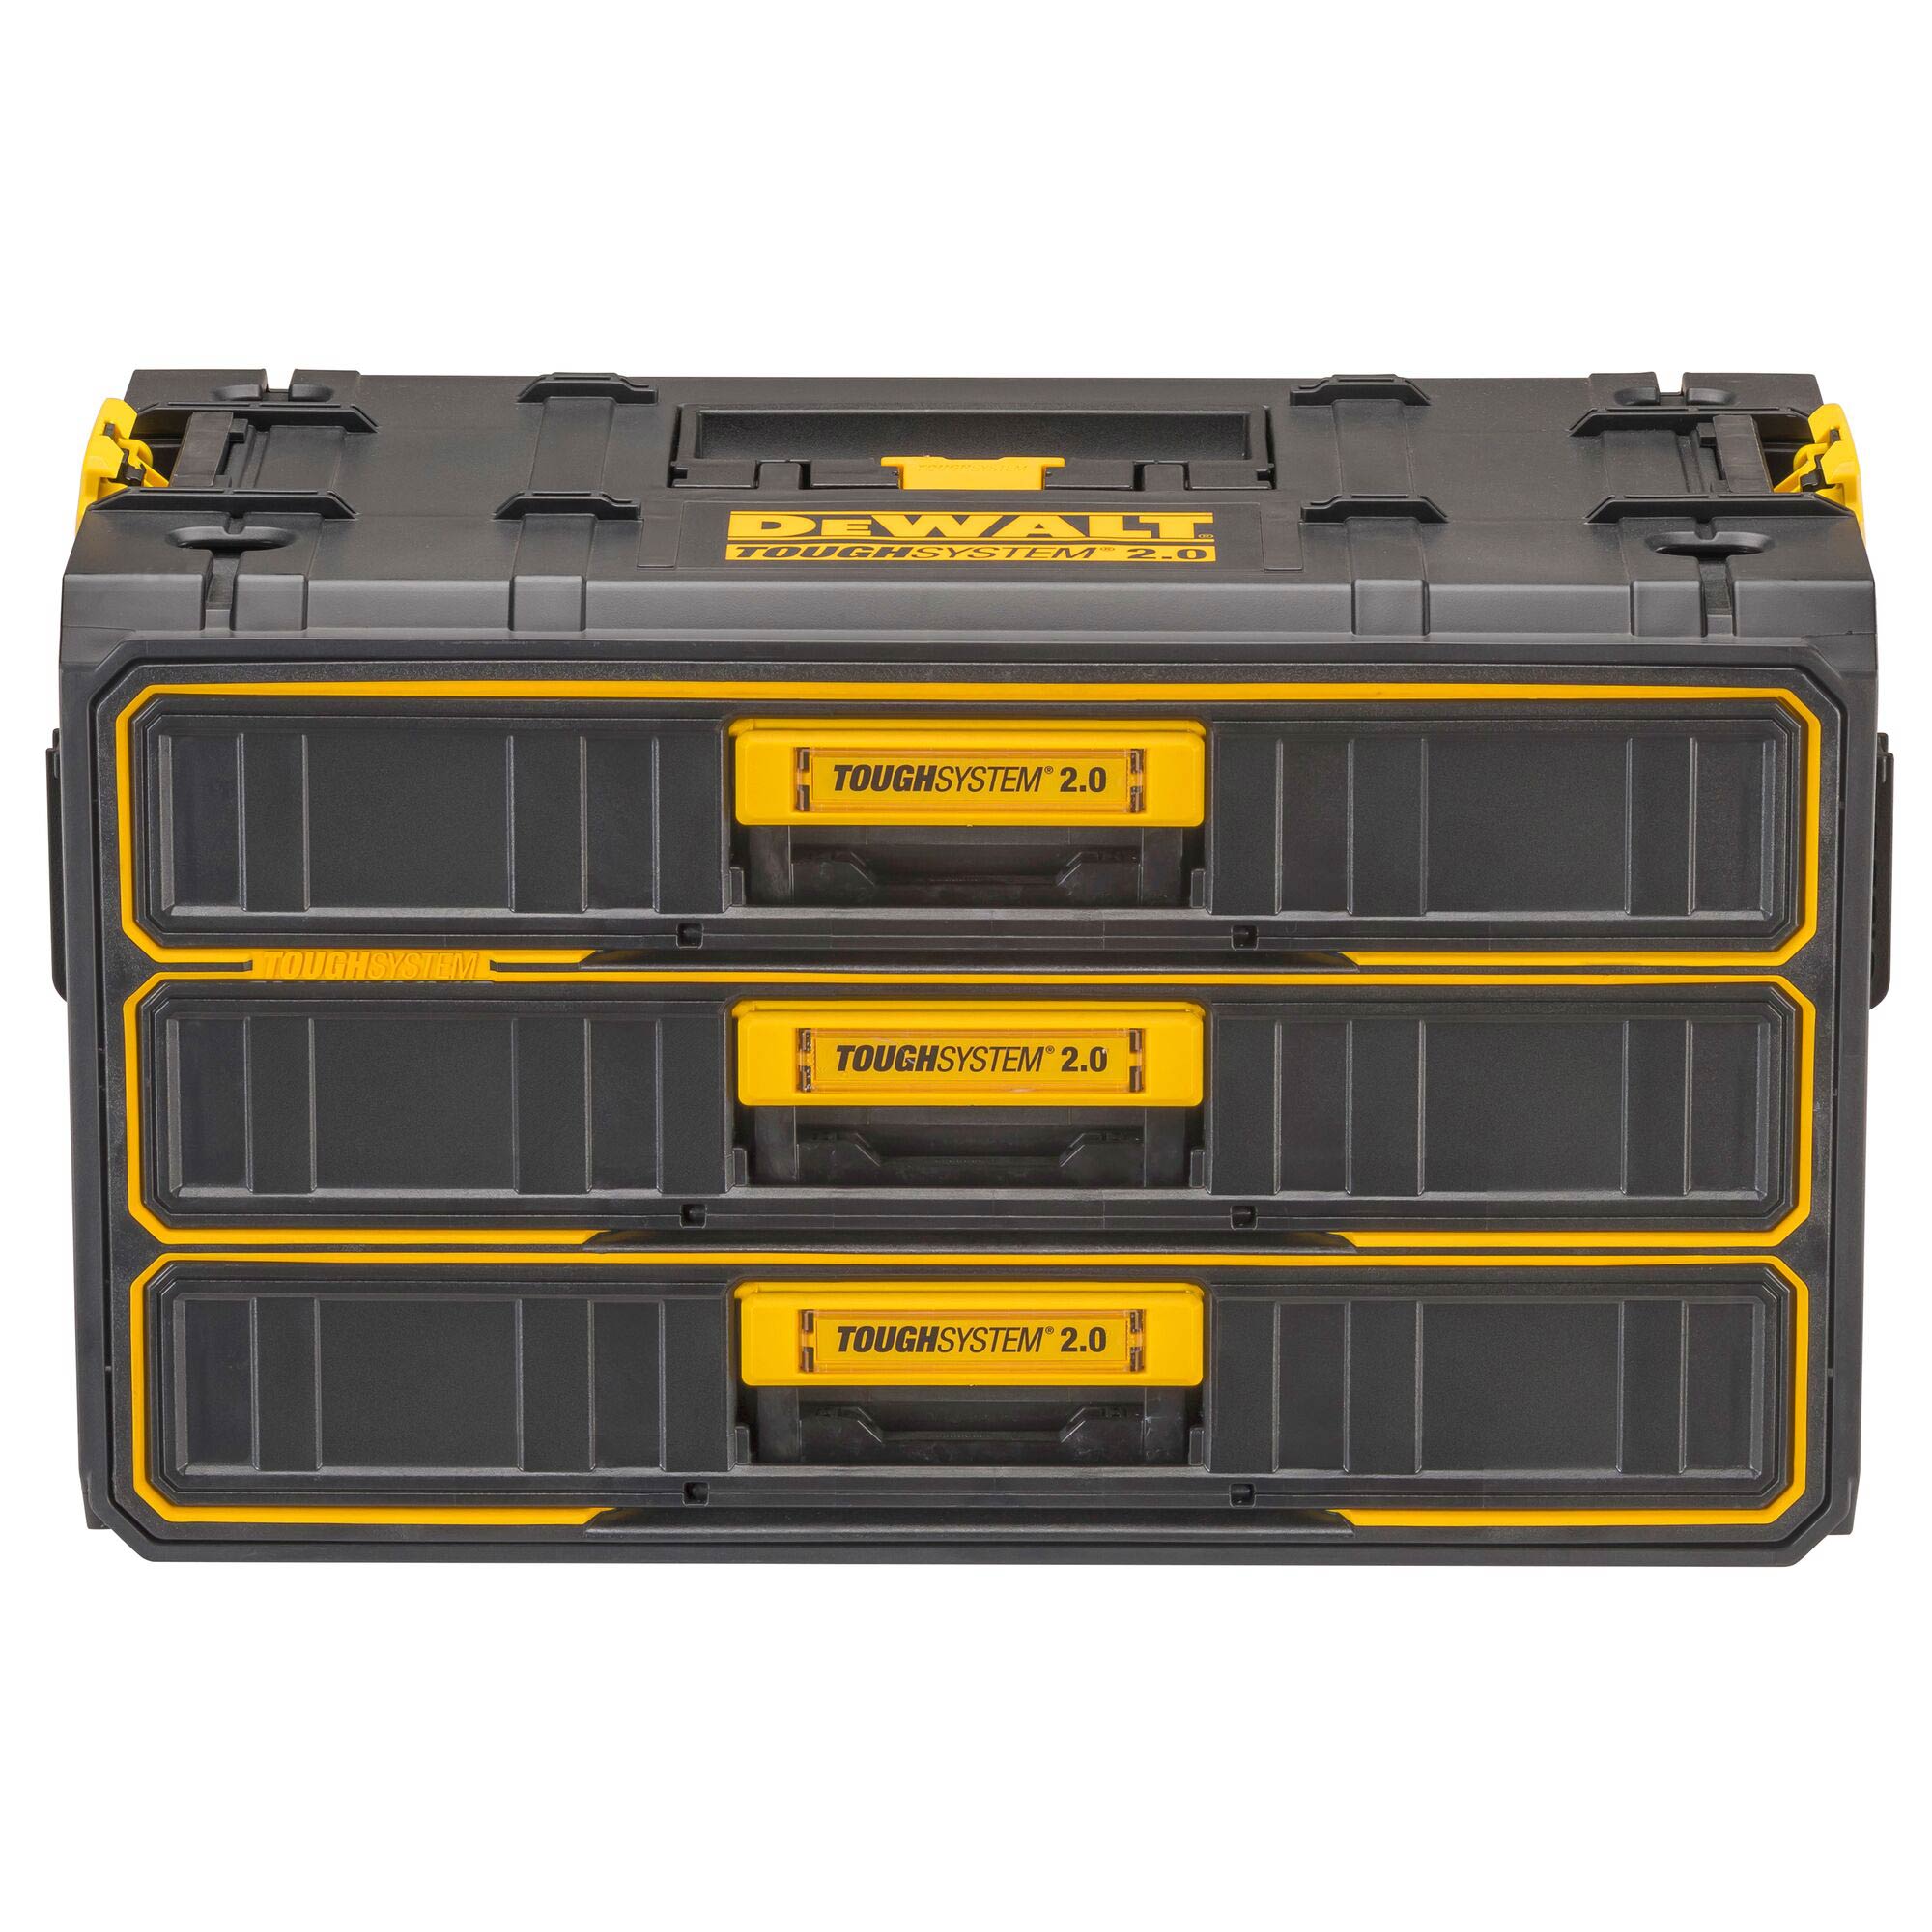 New Dewalt ToughSystem Adapter for Tstak and More!